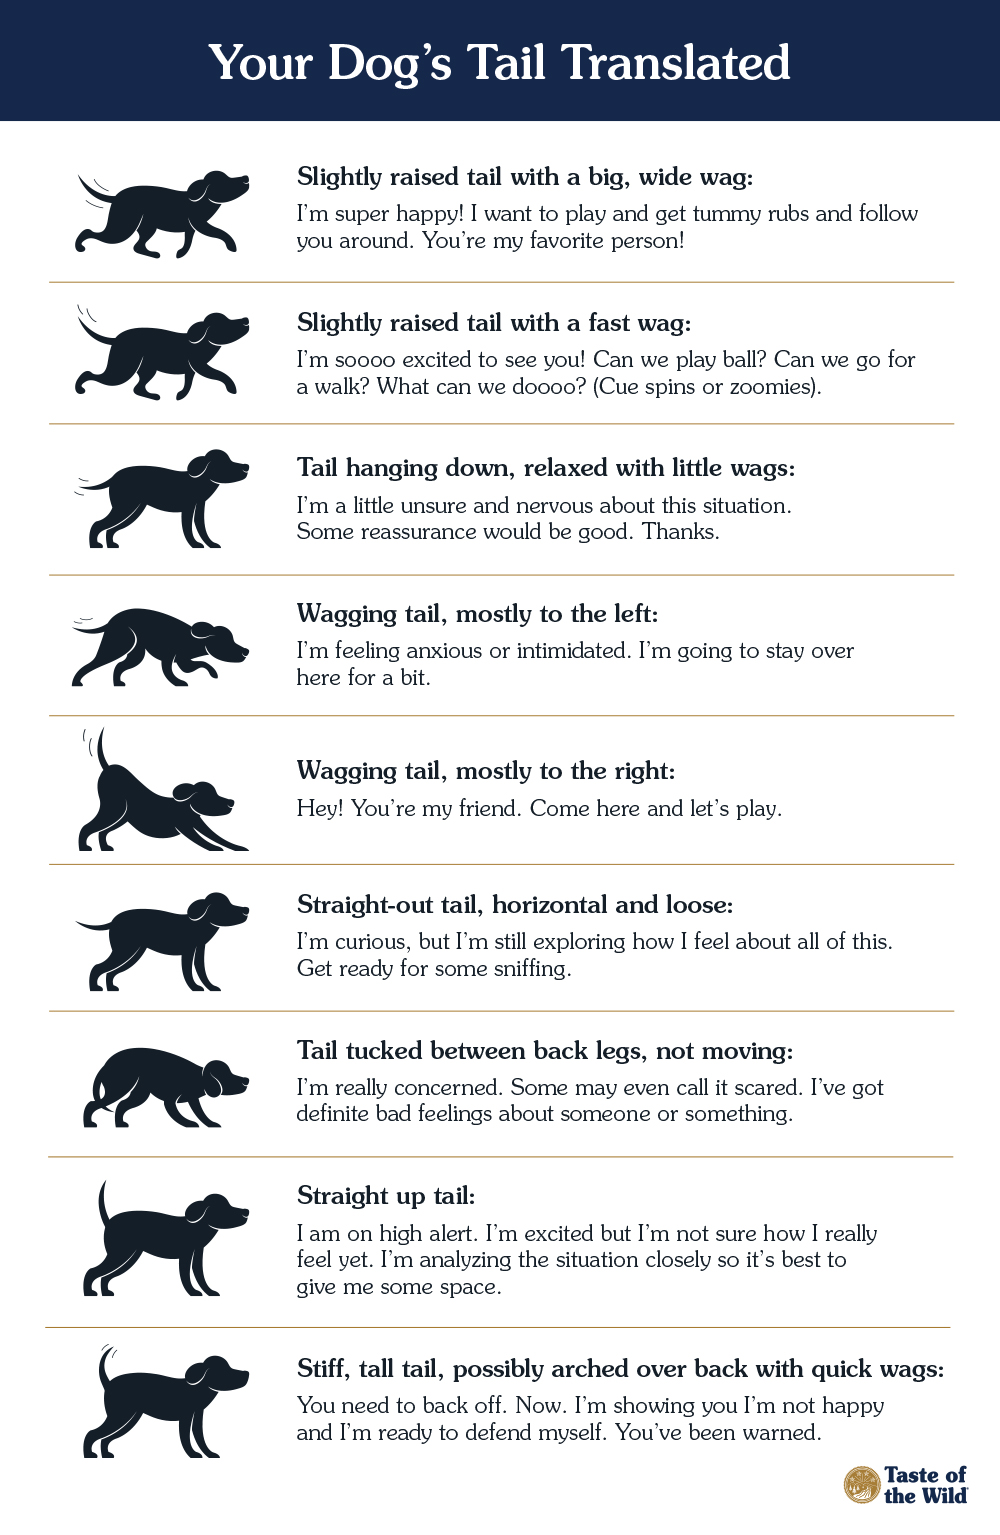 Your Dog’s Tail Translated Info Graphic | Taste of the Wild